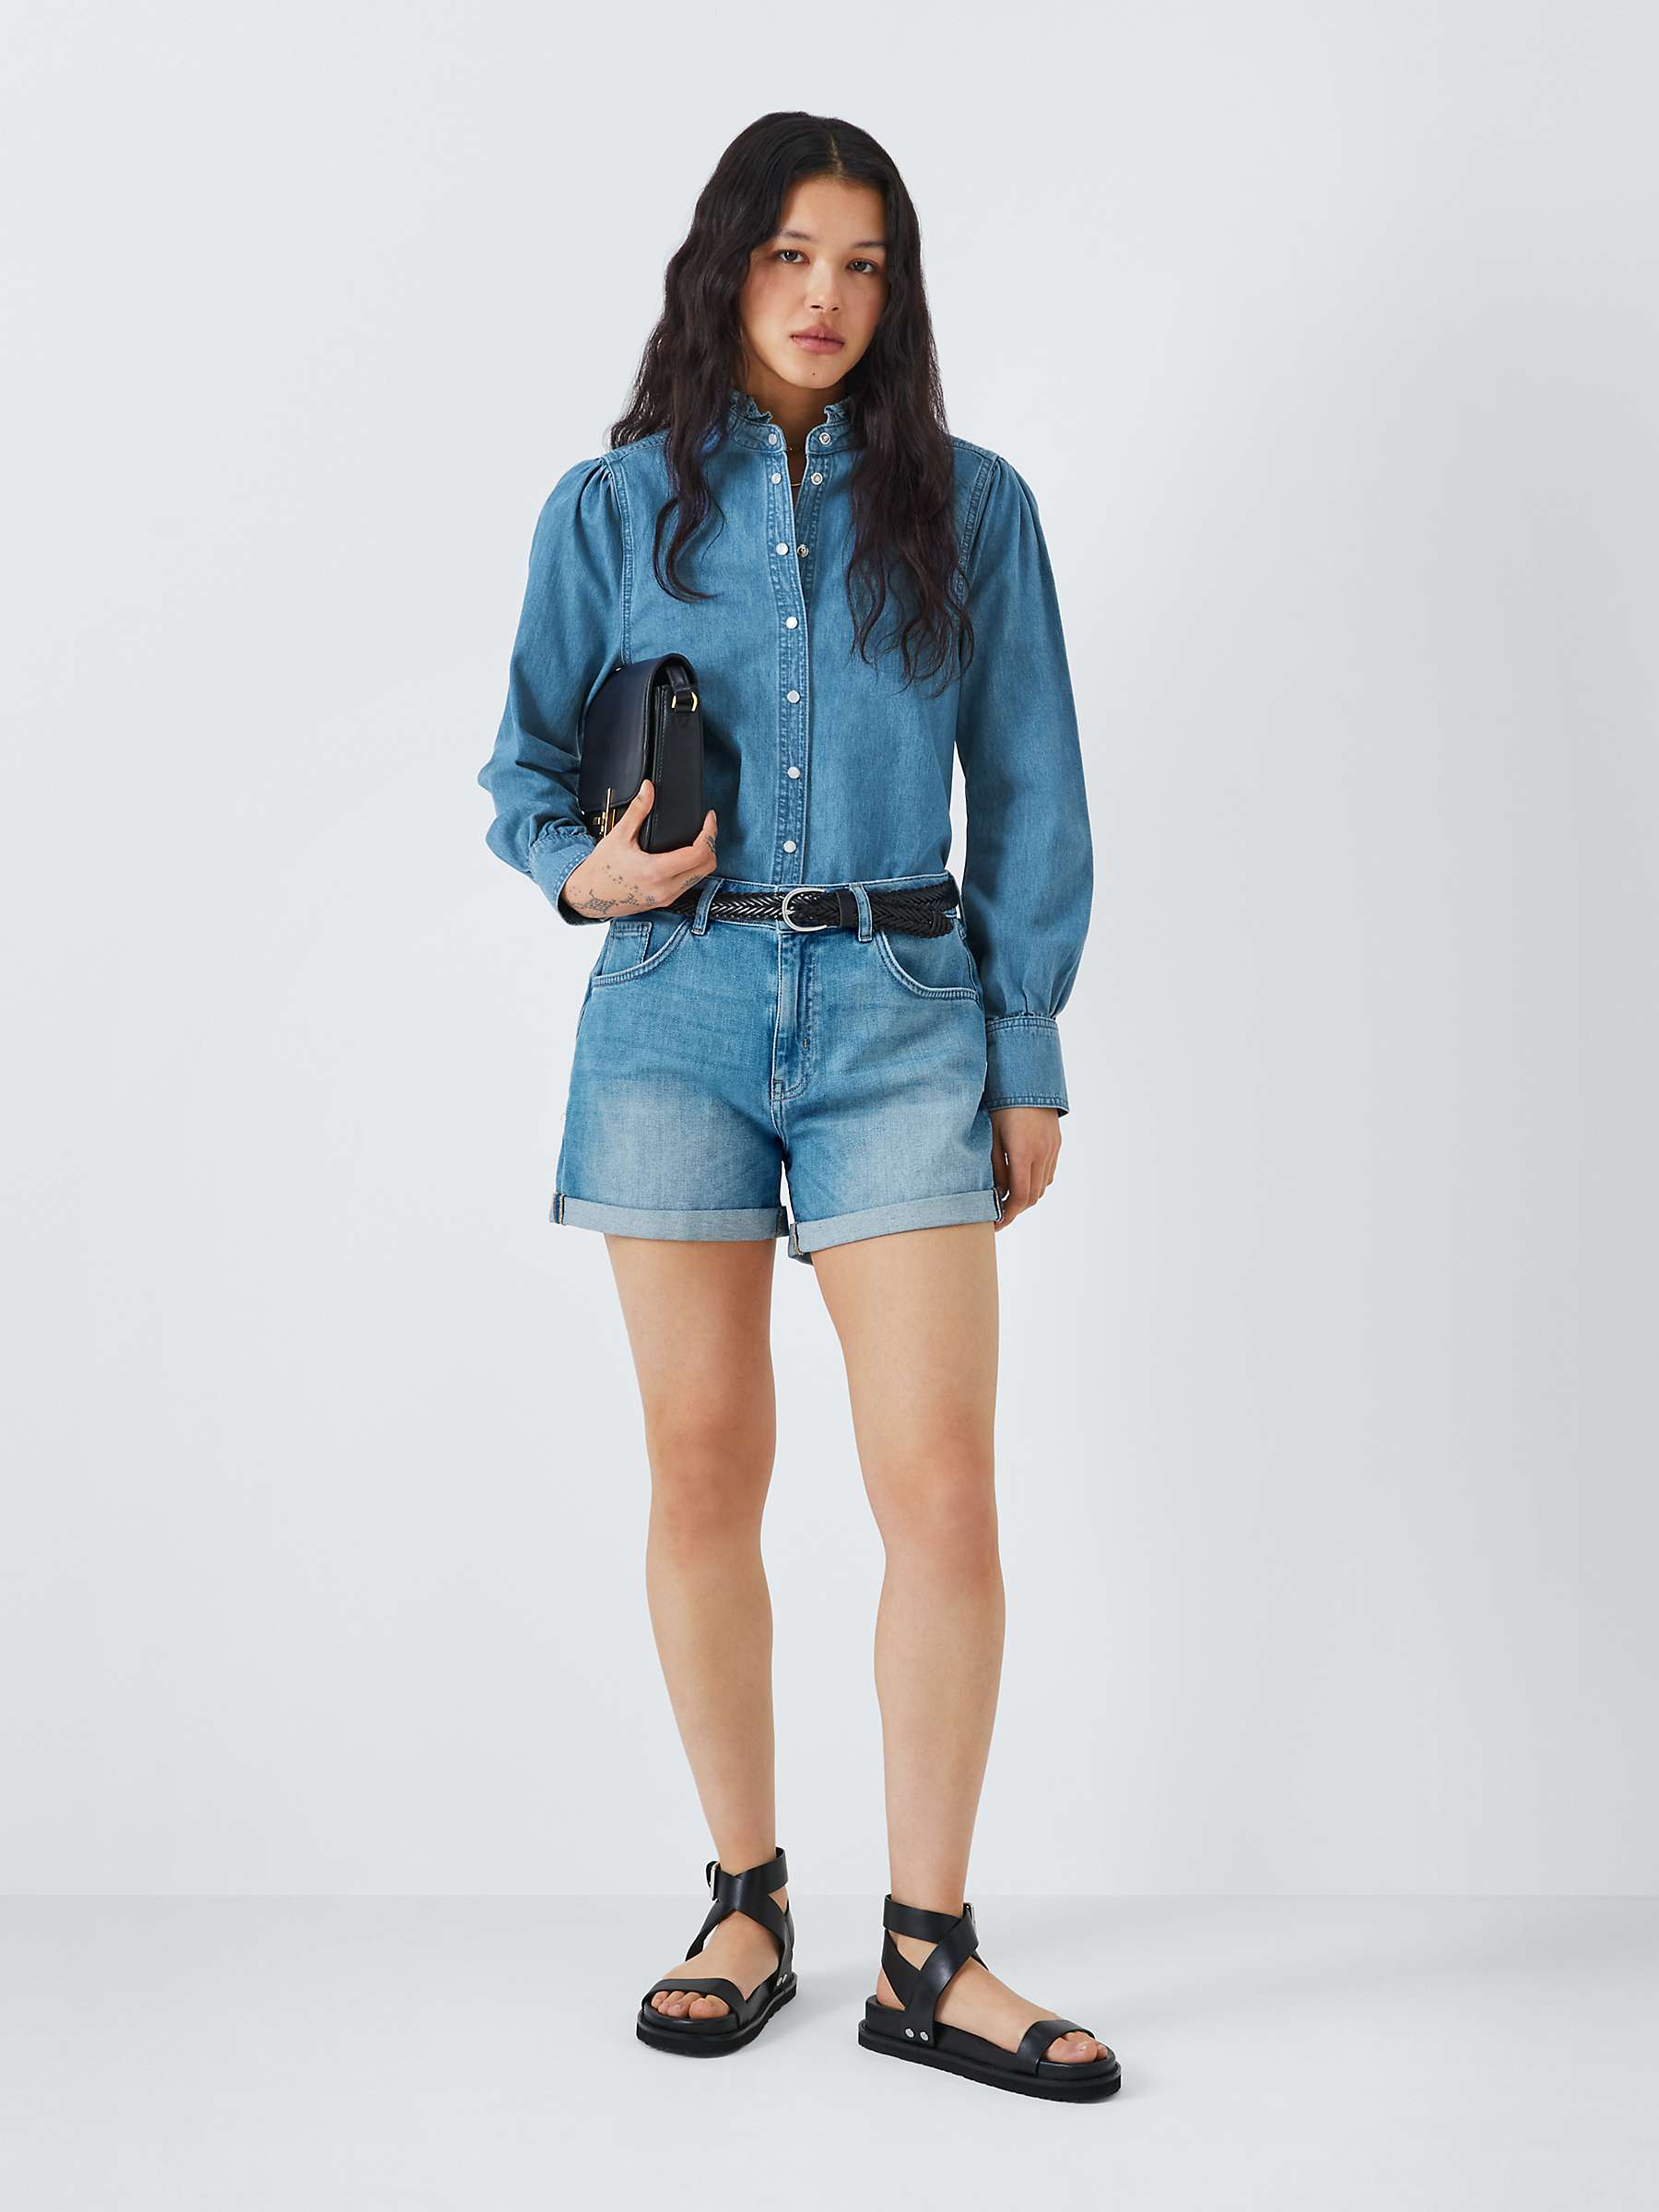 Buy AND/OR Sunset Beach Denim Shorts, Mid Blue Online at johnlewis.com